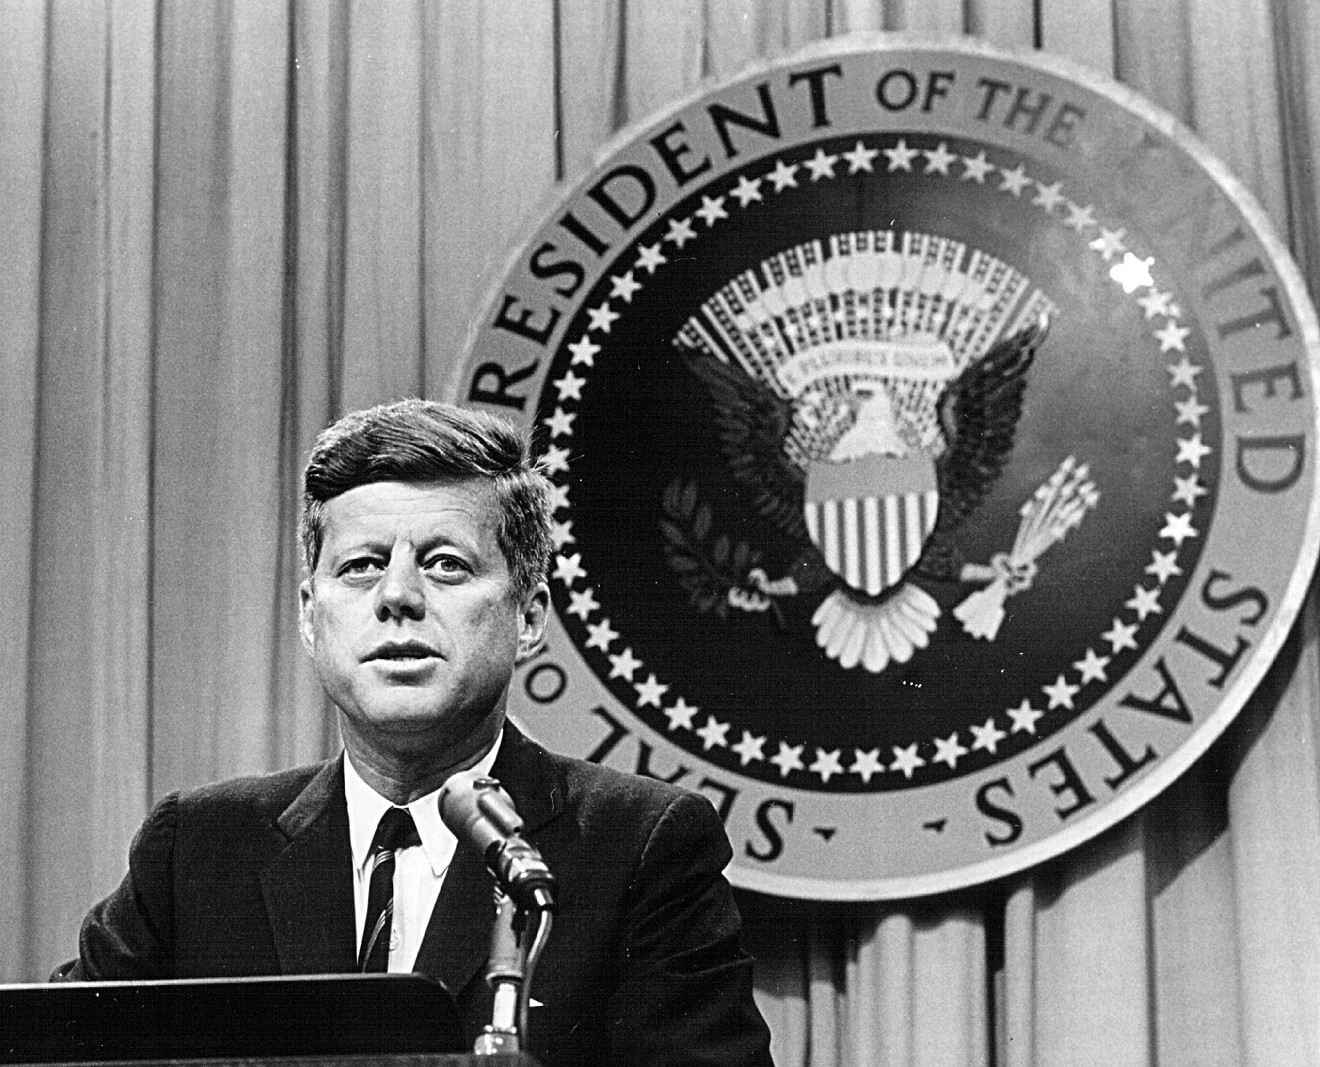 All documents relating to the assassination of JFK have yet to be released.